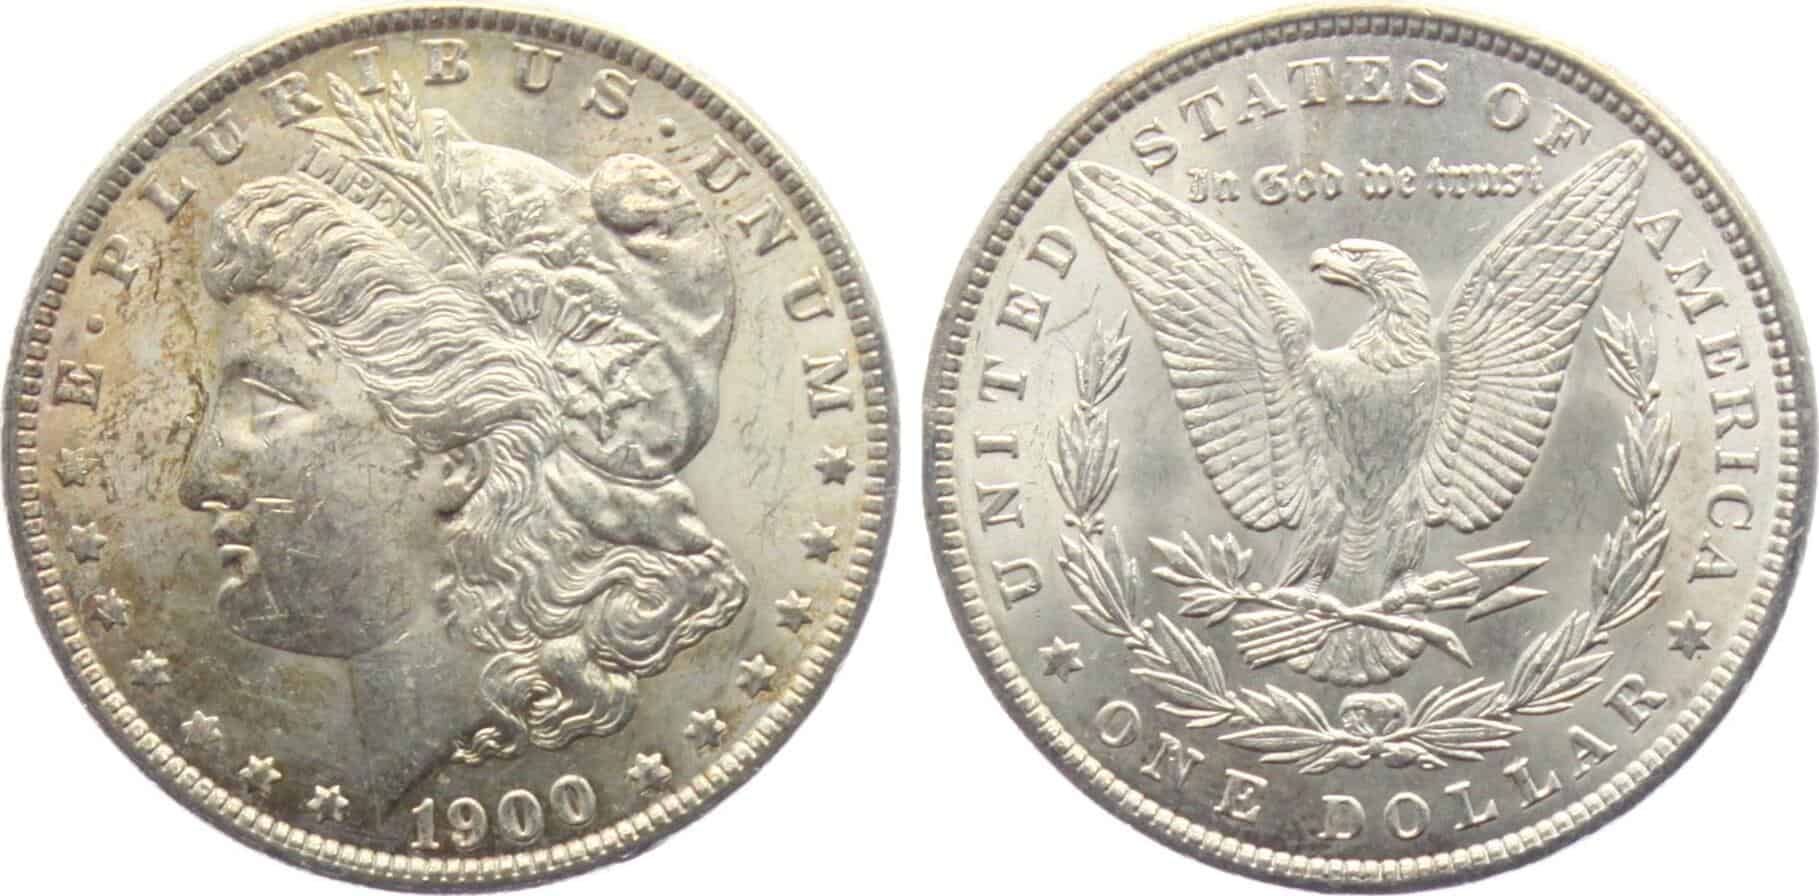 1900 Morgan silver dollar without a mint mark